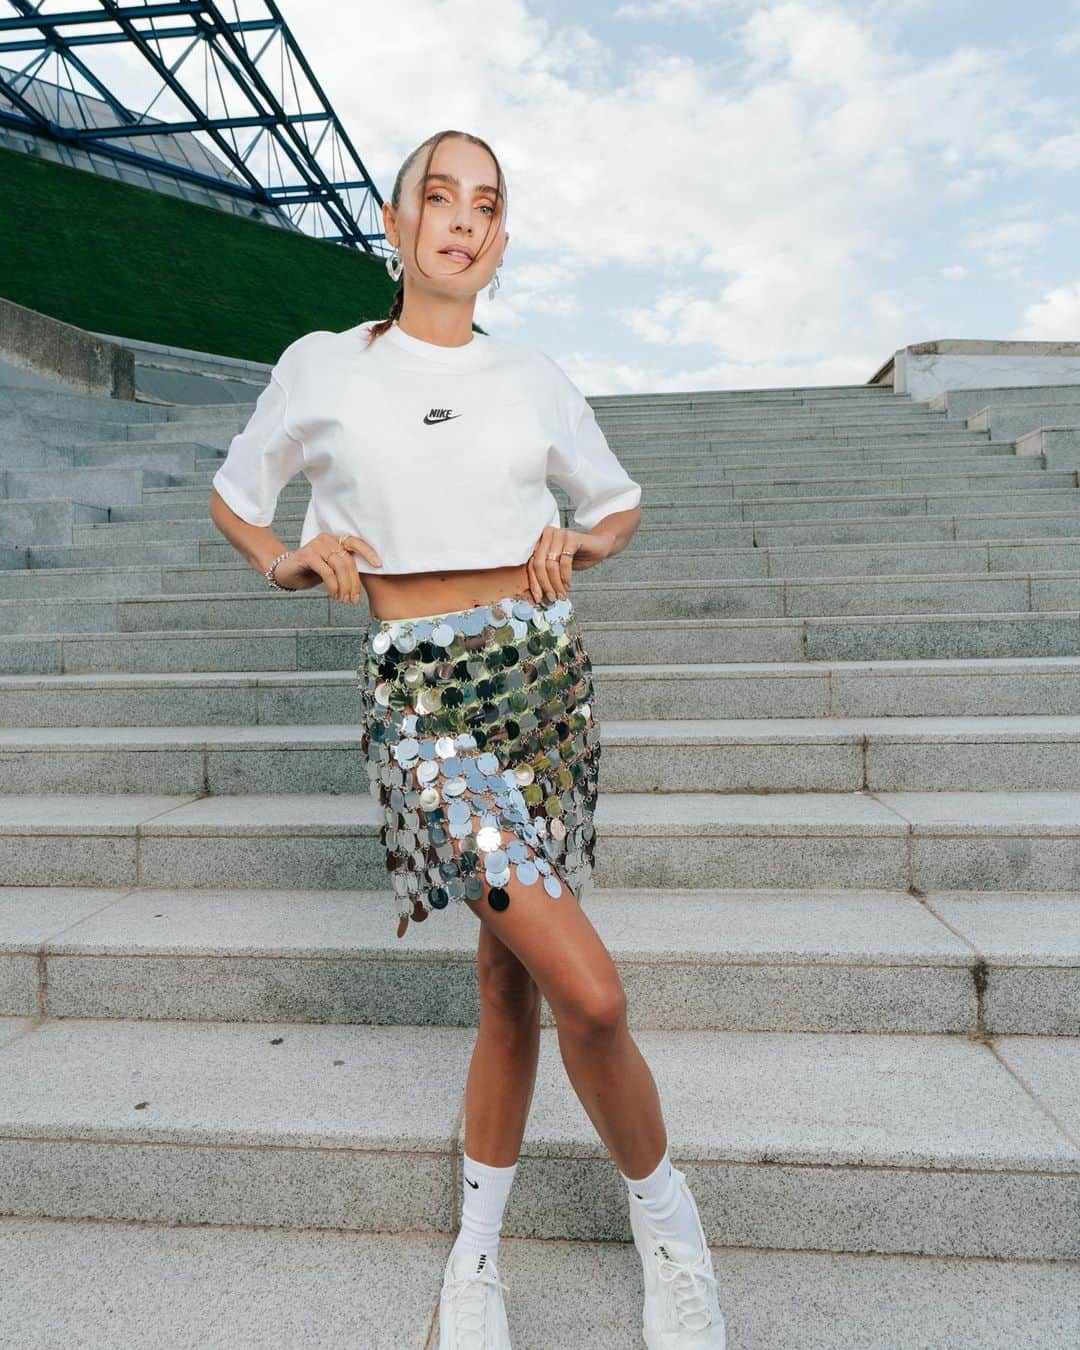 Kirsty Godsoのインスタグラム：「Popping off in Paris 🪩✨Pulled up for the @nikewomen Goddess Awakened show imagined by kiwi queen @parrisgoebel 🤍 Minds, hearts and hopes all totally expanded - just wow! Never been more proud, inspired and thankful to be part of this @nikewomen crew 💚⚡️」